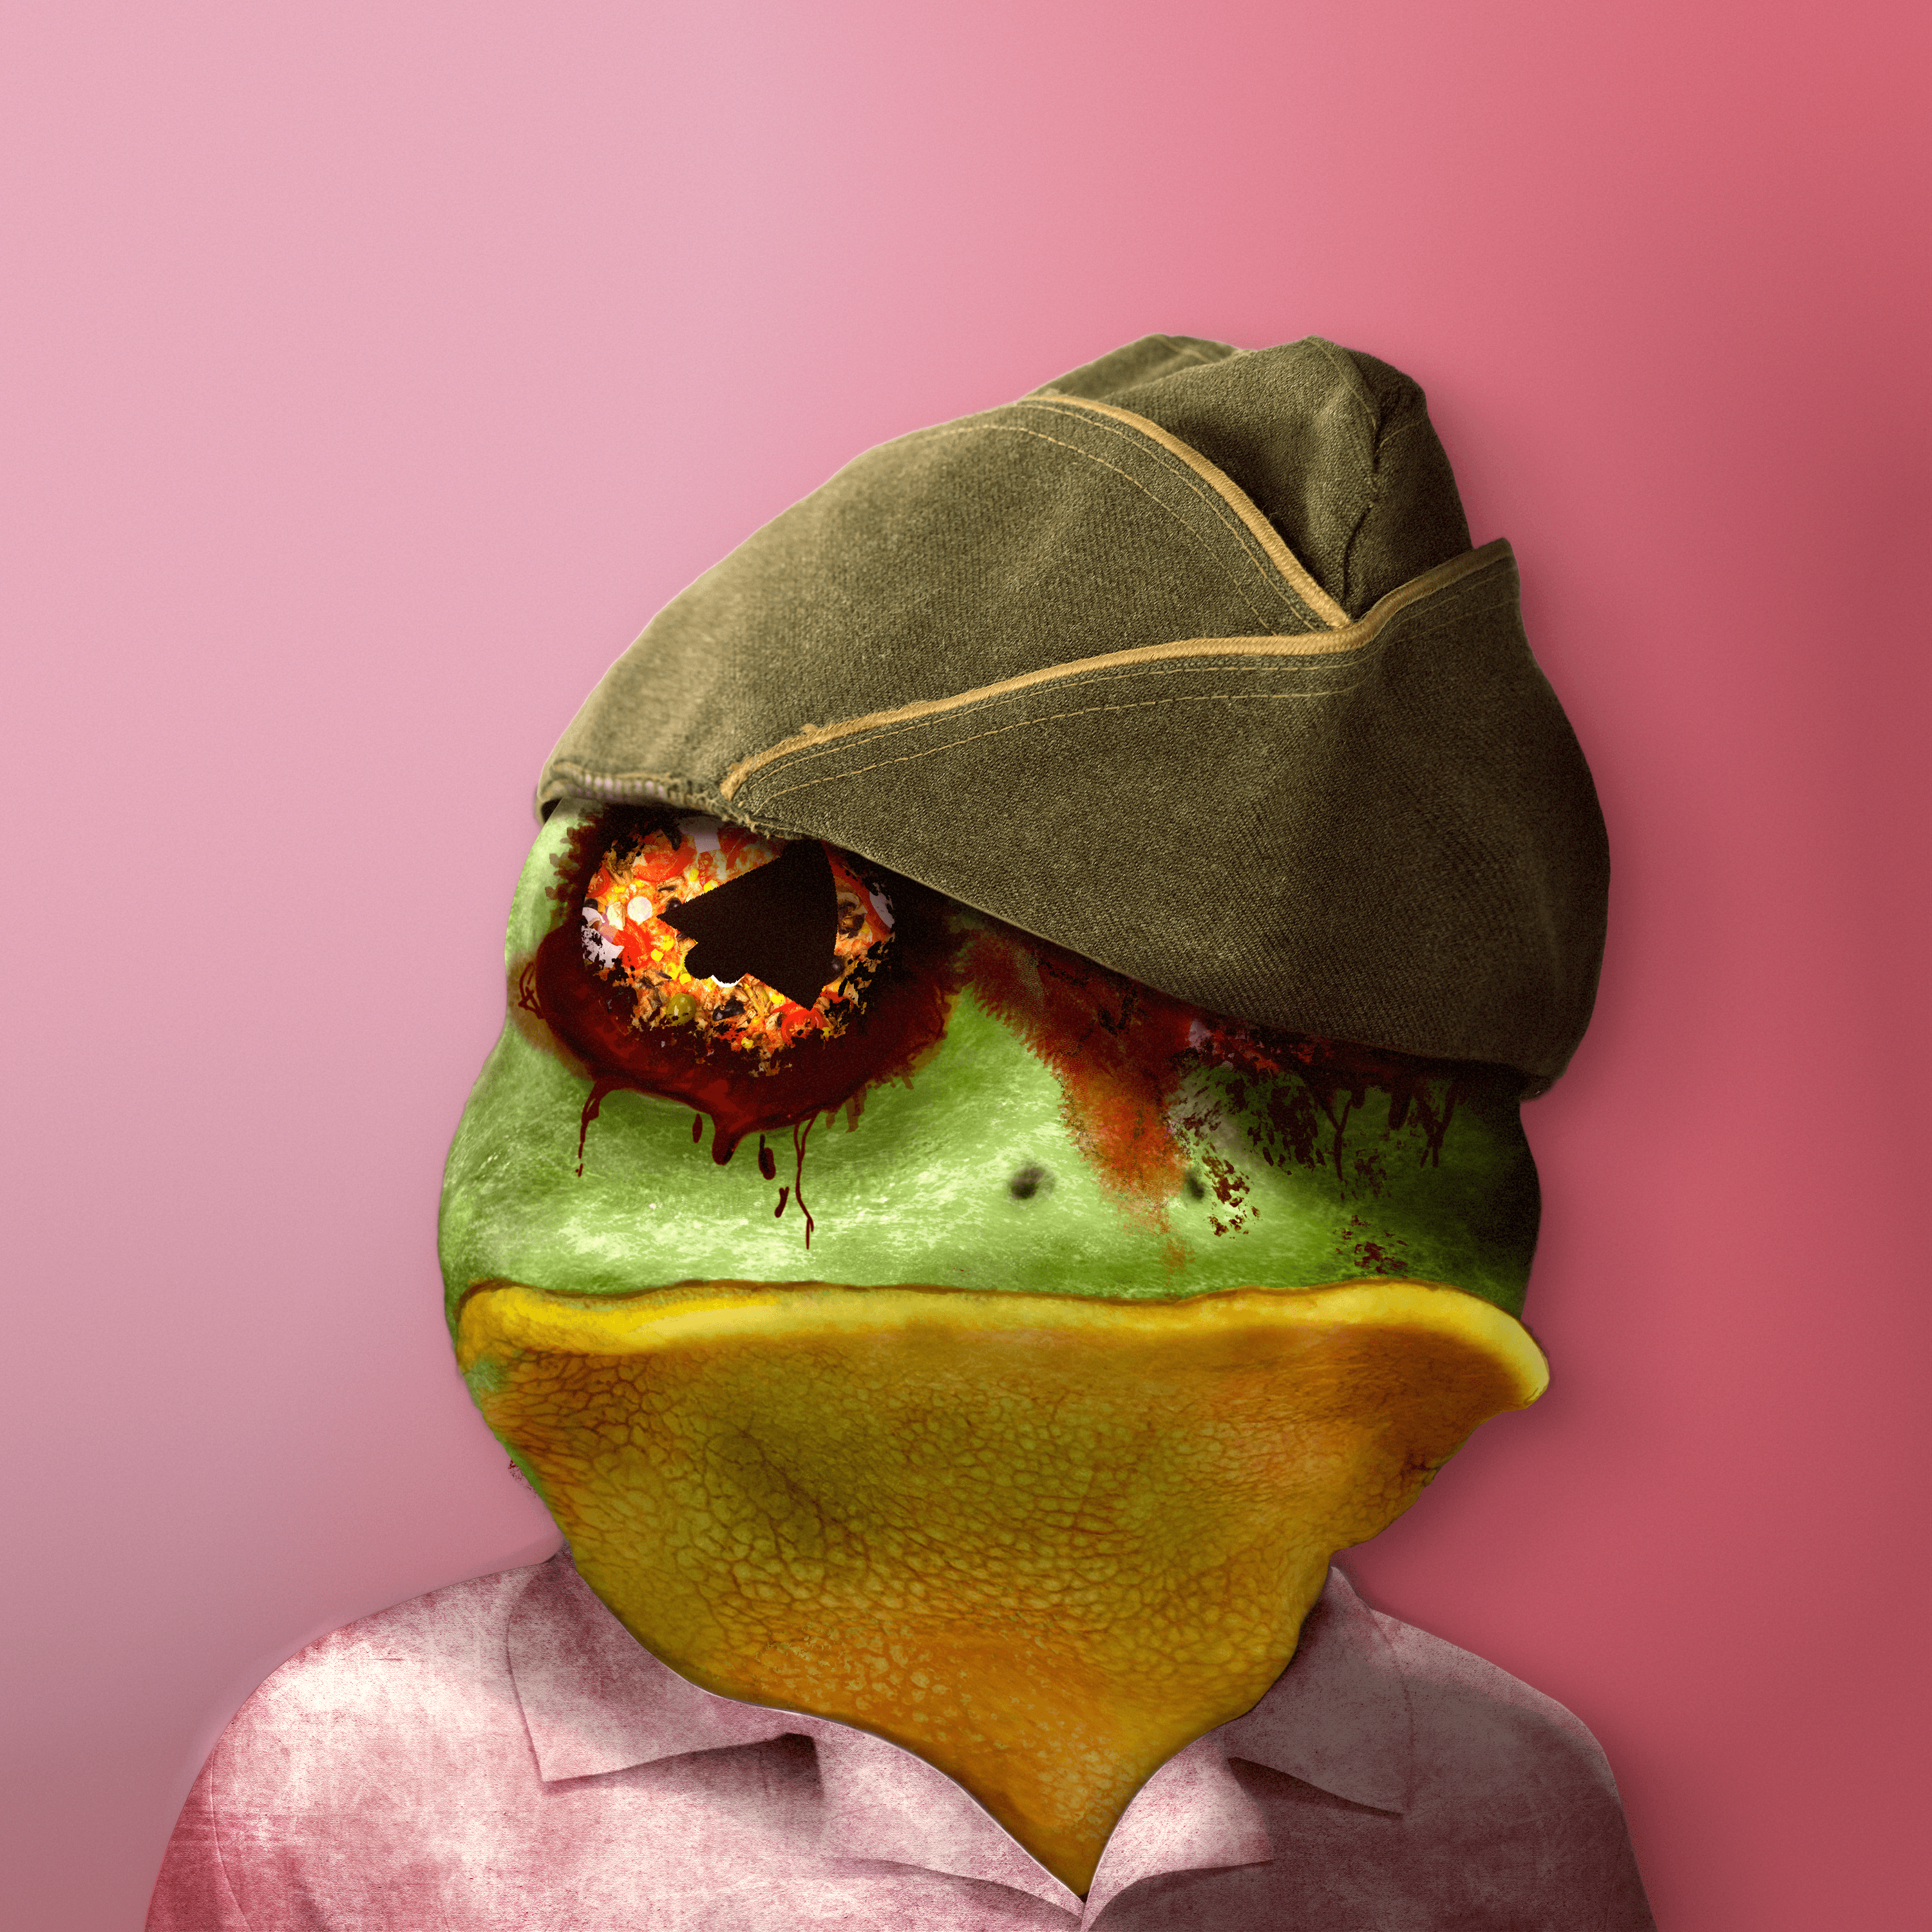 Notorious Frog #8704